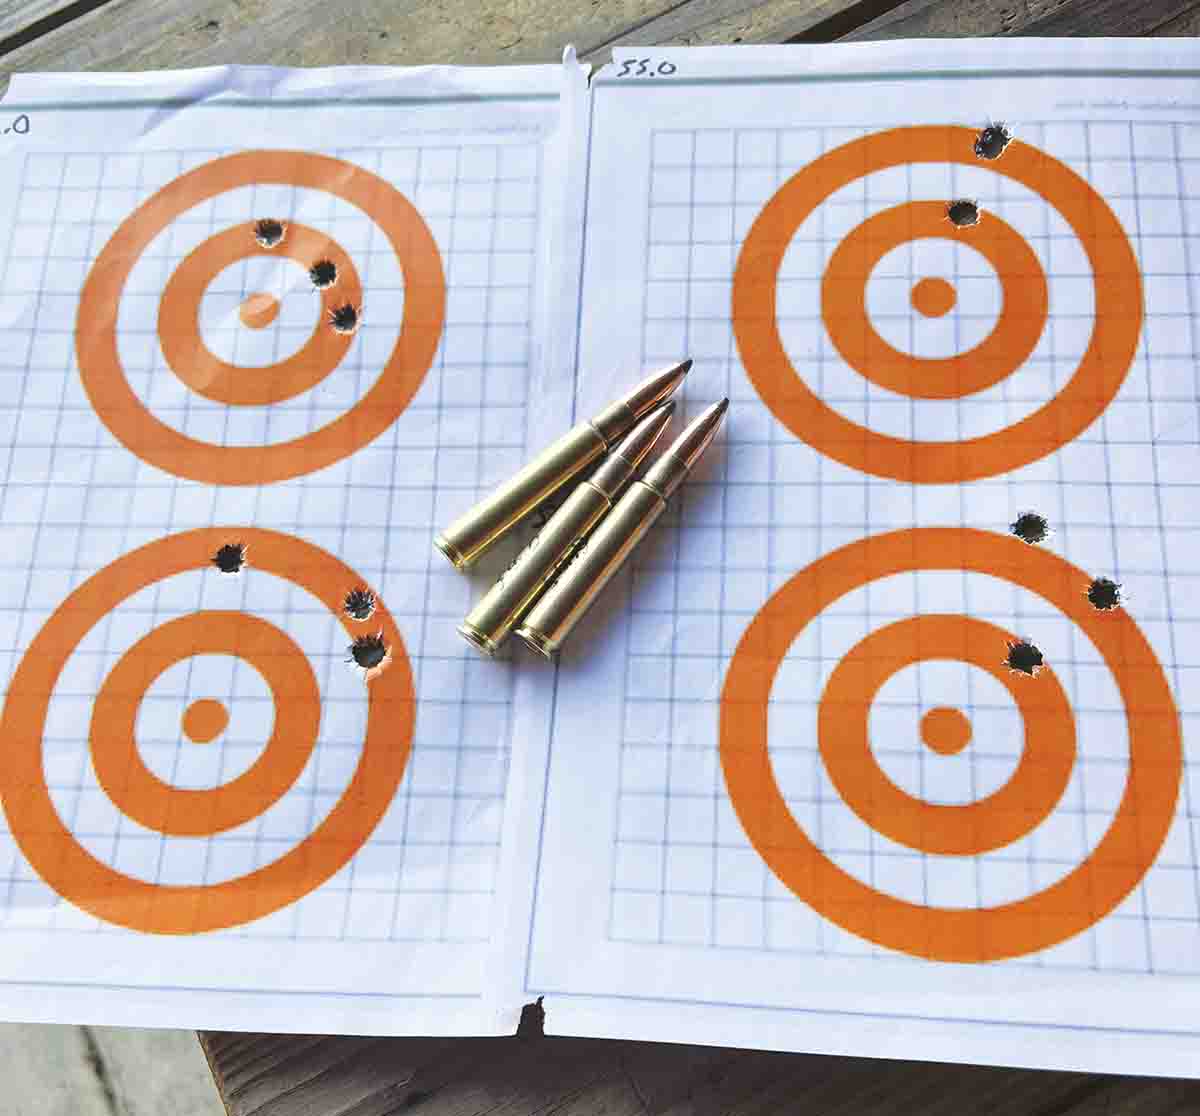 These four range targets were shot using Speer 225-grain softpoint boat-tail bullets. Accuracy may not be match worthy, but it is more than acceptable for hunting at reasonable ranges.